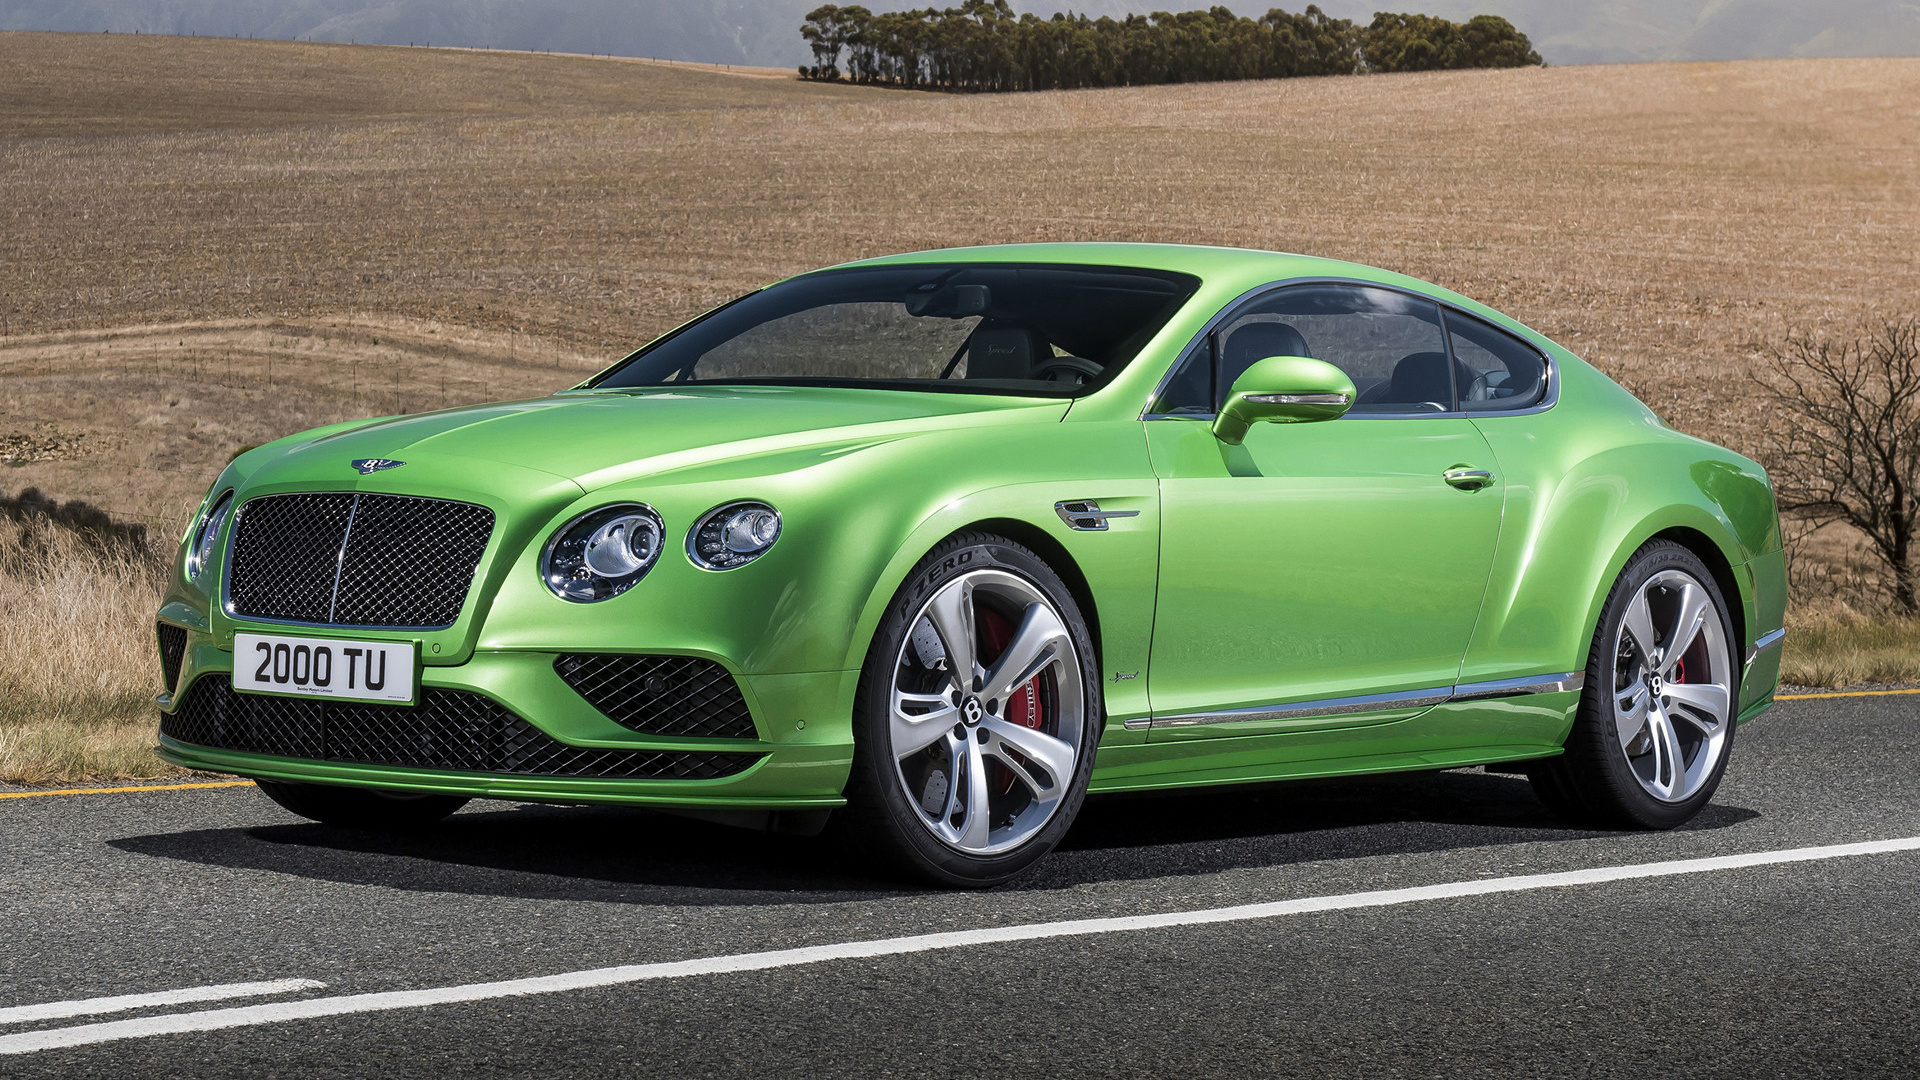 Bentley Continental Gt Speed Car Coupe Fastback Grand Tourer Green Car Luxury Car 1920x1080